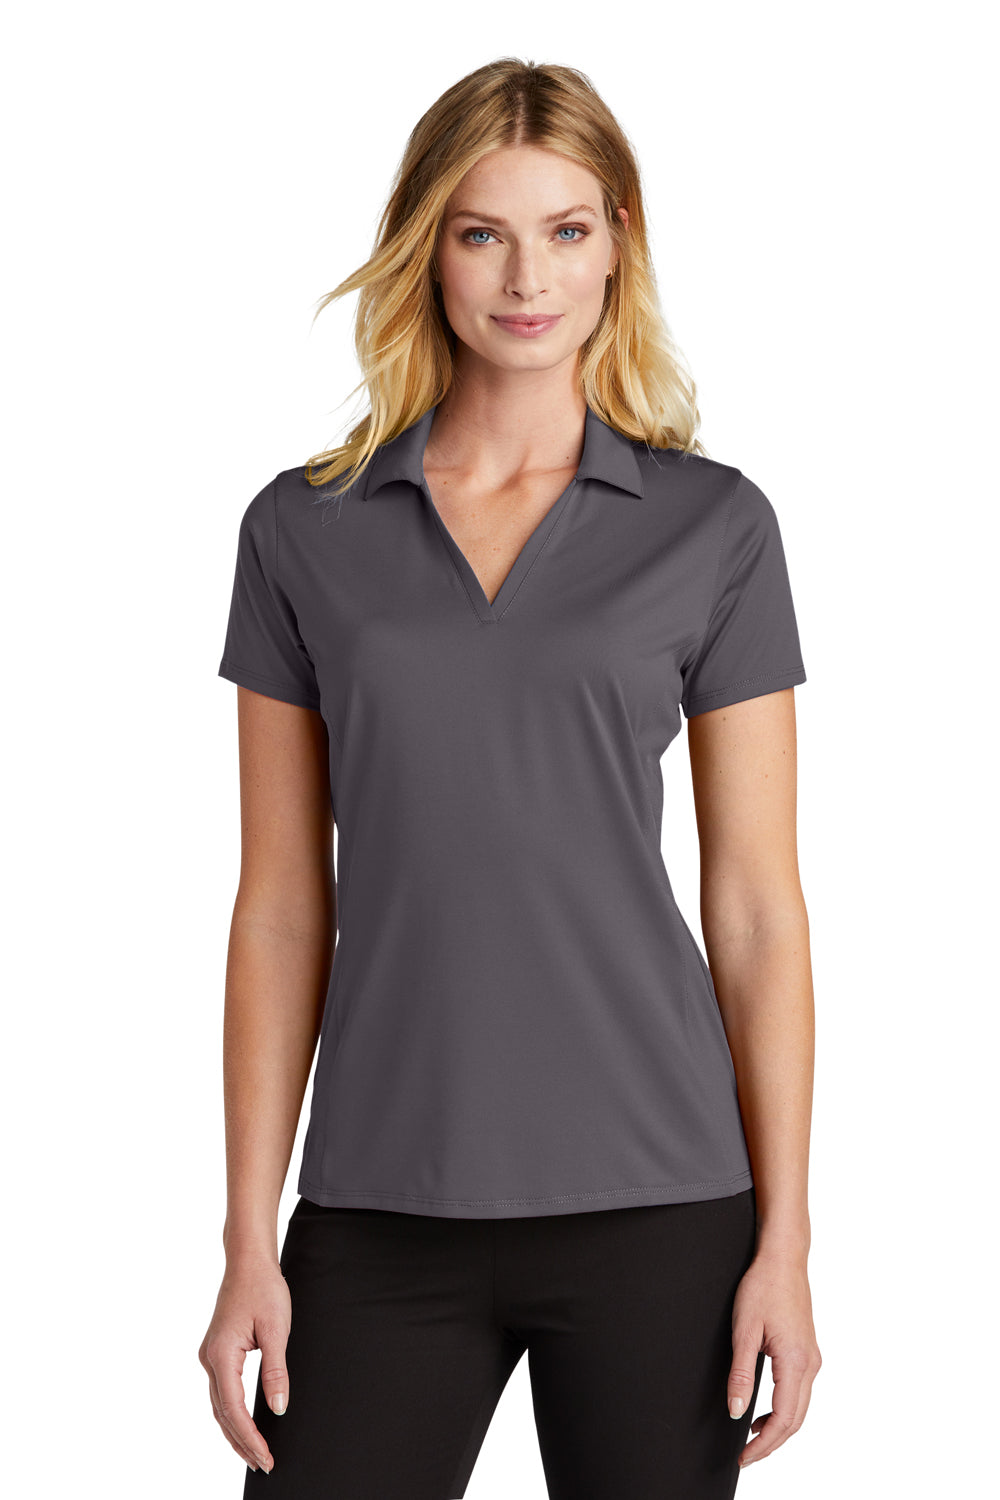 Port Authority LK398 Performance Staff Short Sleeve Polo Shirt Graphite Grey Front